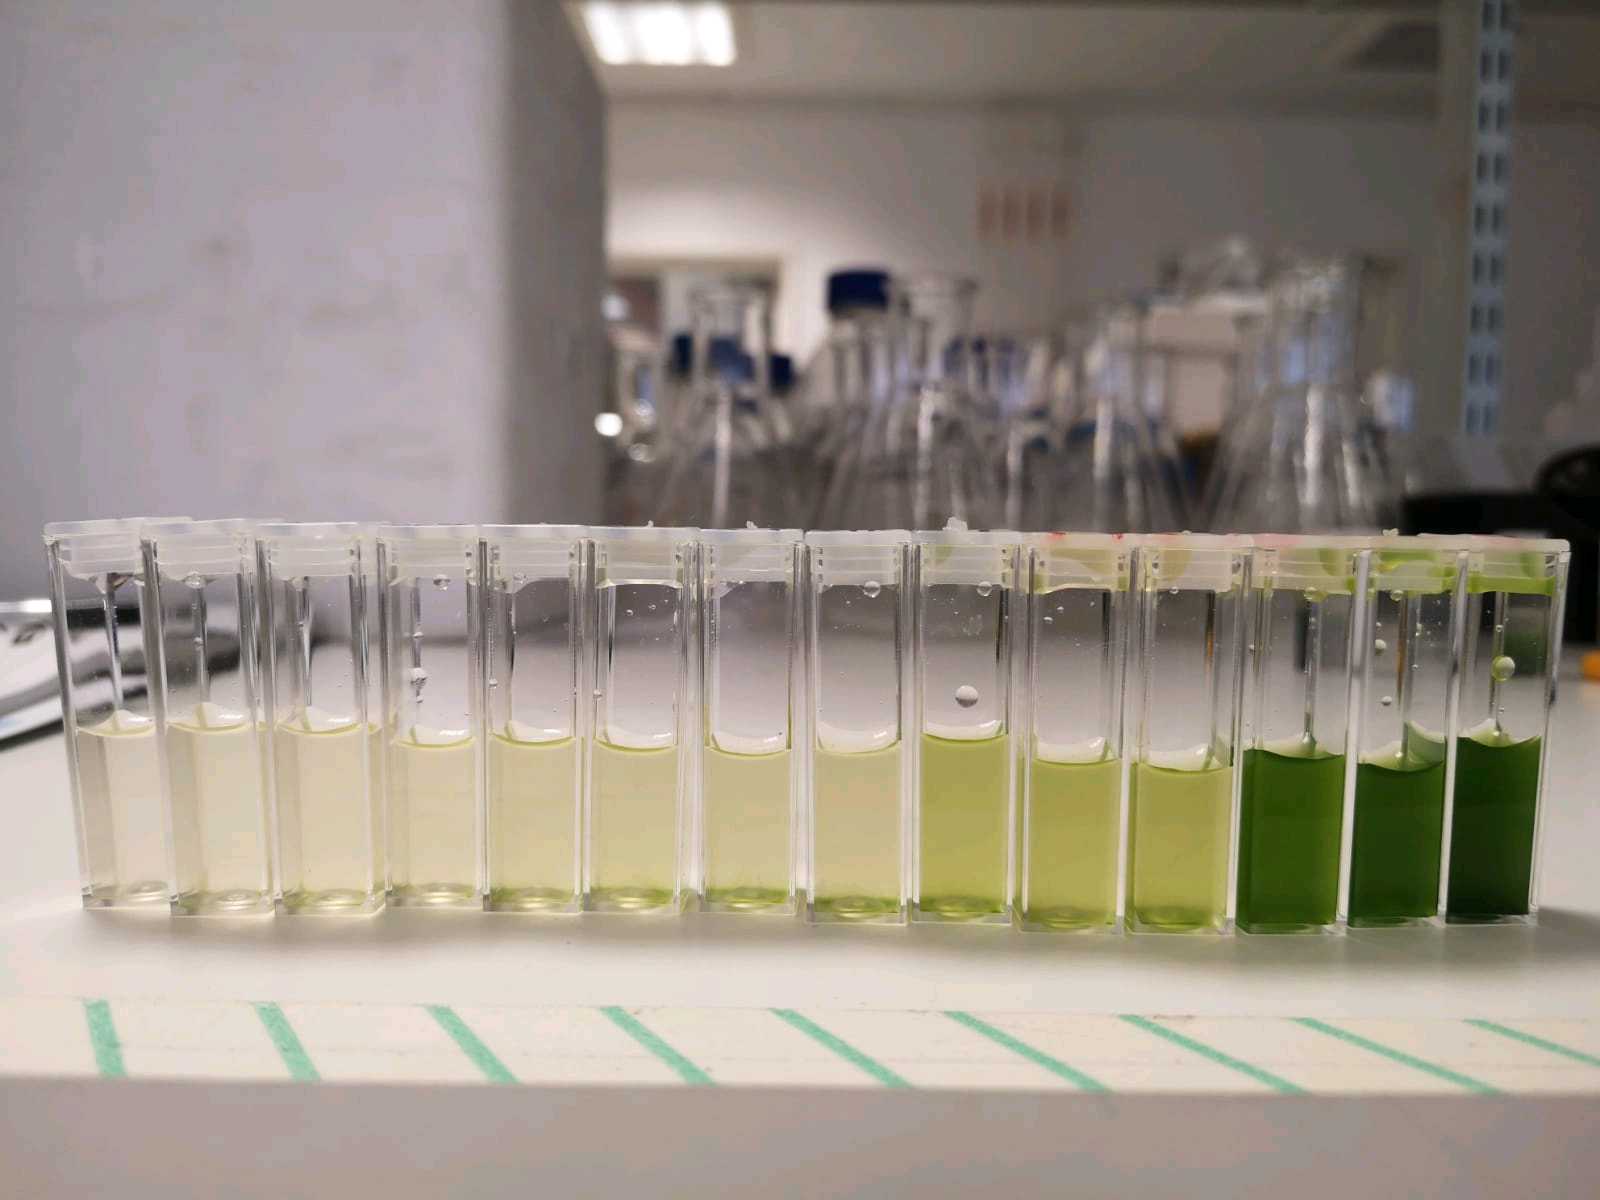 concentrated algae arranged in a neat row of vials containing gradually increased concentrations